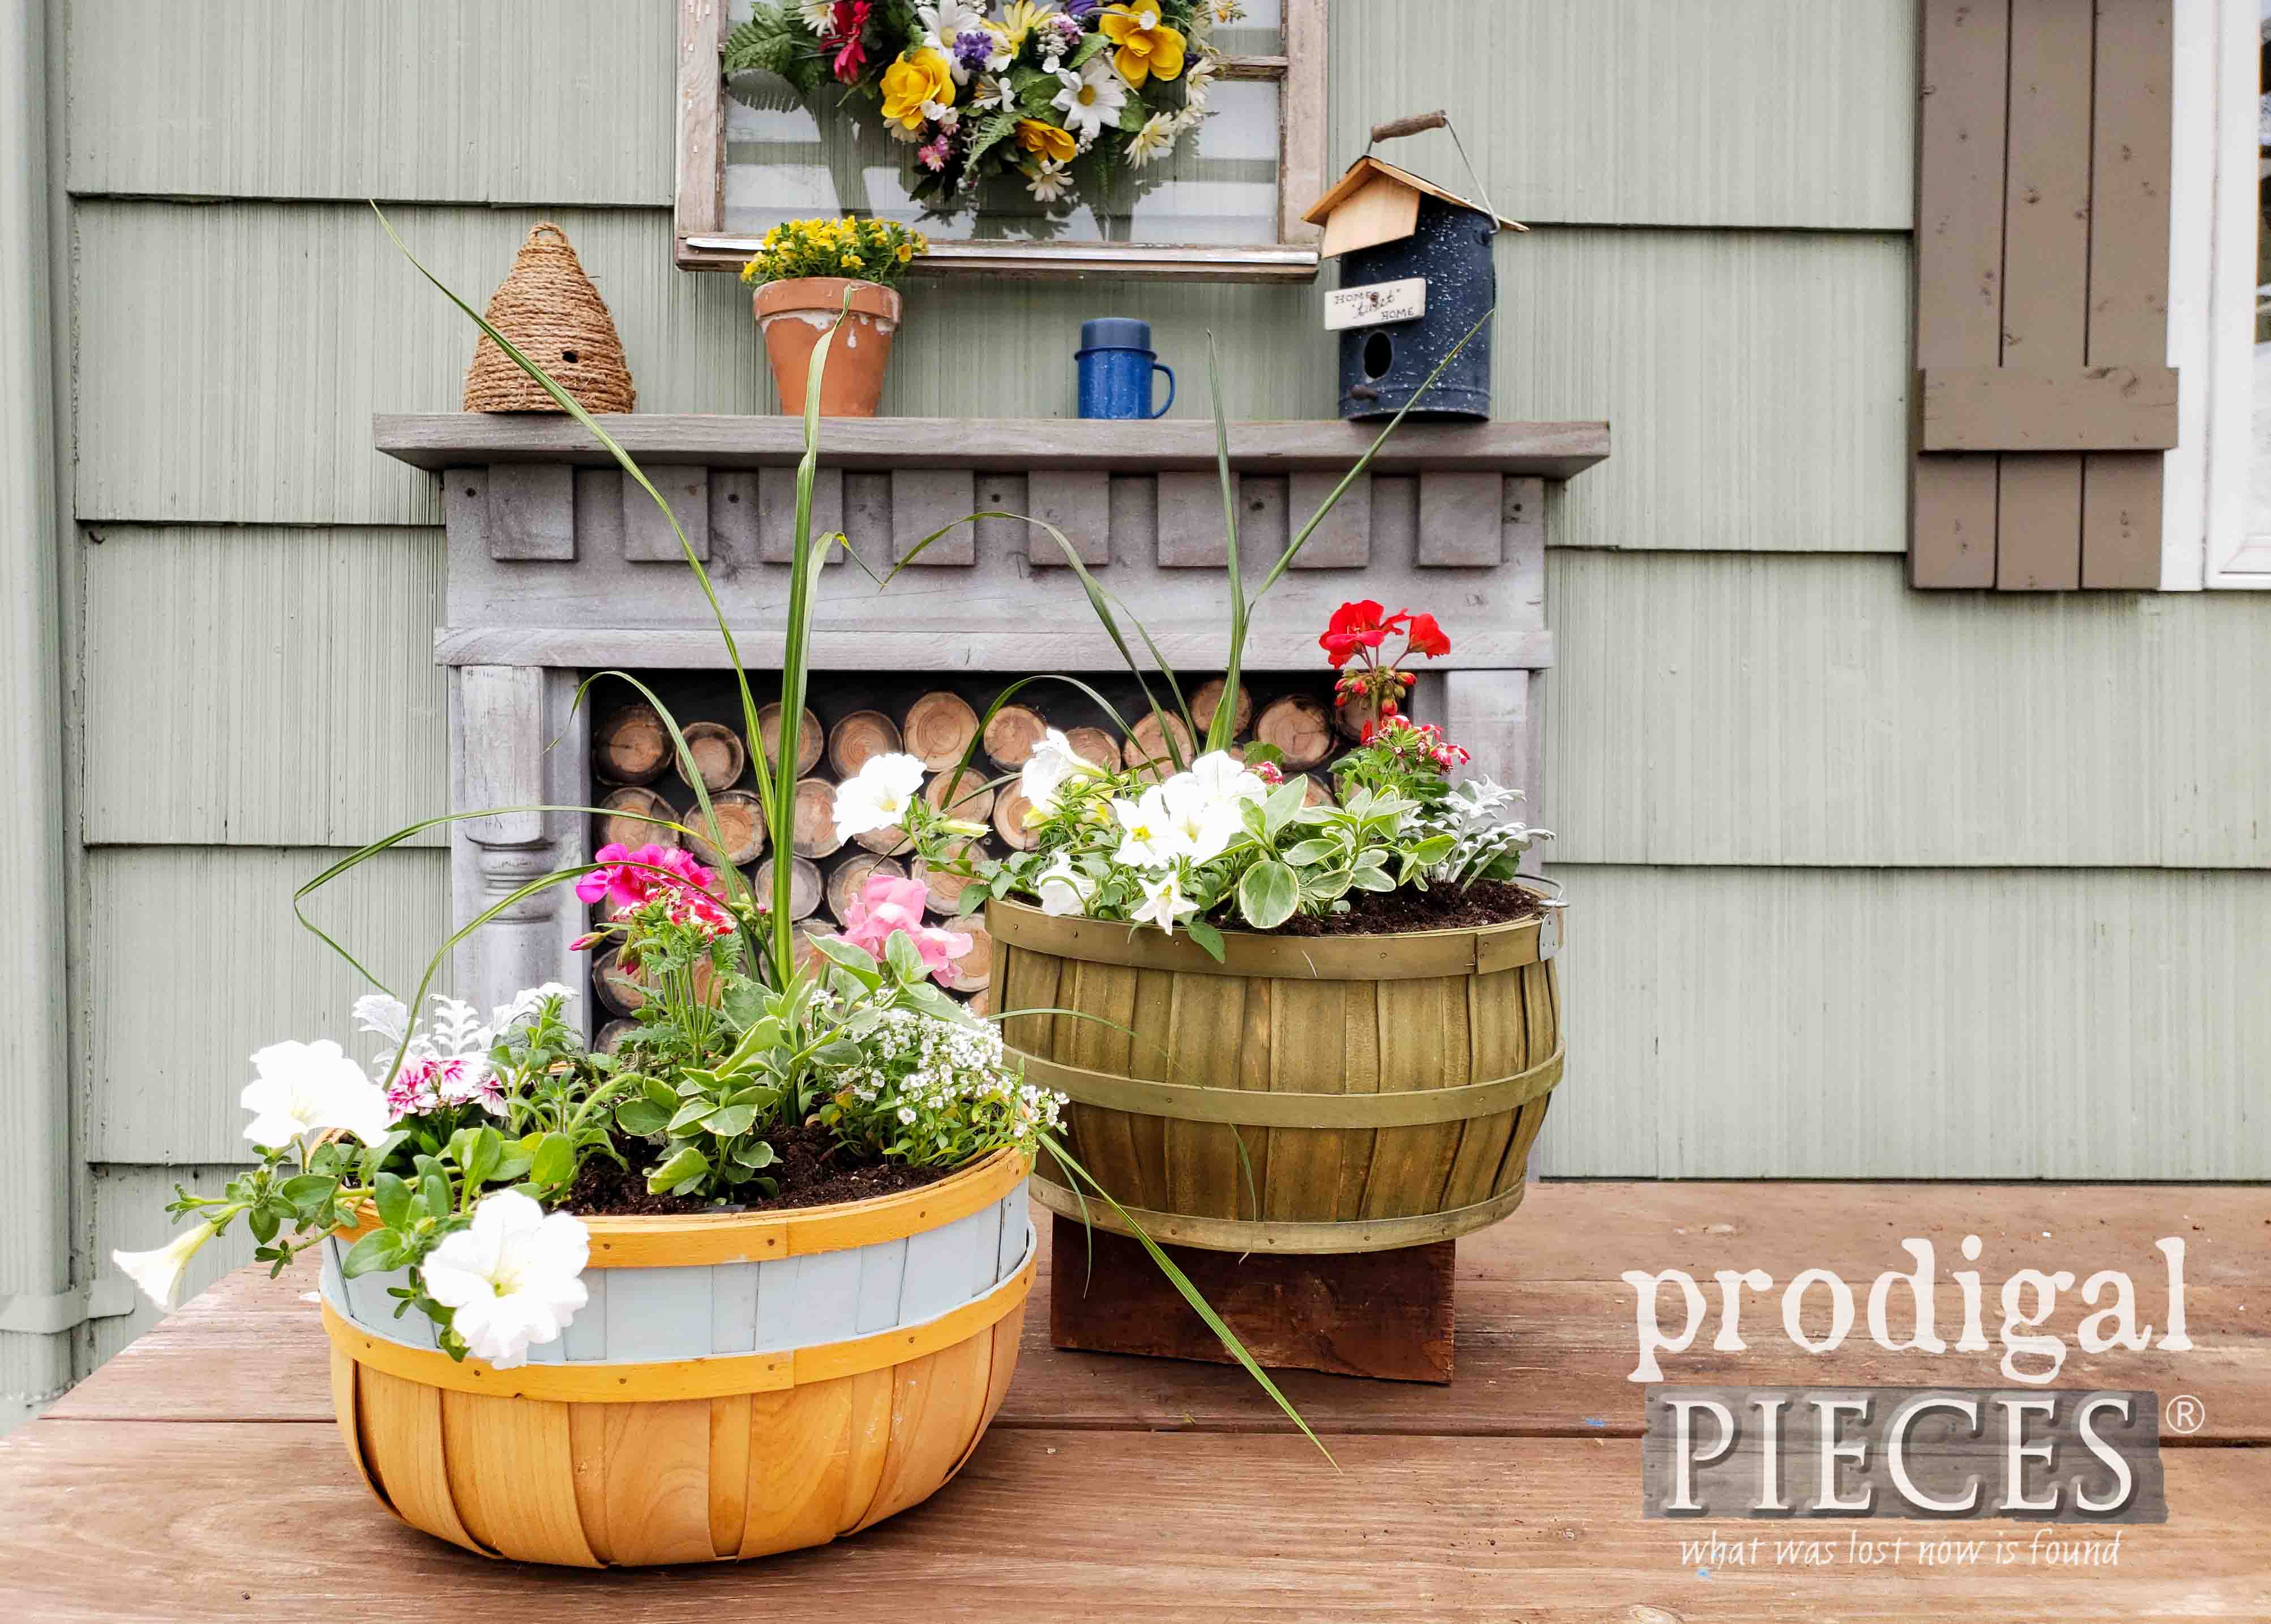 DIY Mother's Day Flower Baskets with Video Tutorial by Larissa of Prodigal Pieces | prodigalpieces.com #prodigalpieces #mothersday #diy #giftideas #flowers #garden #home 